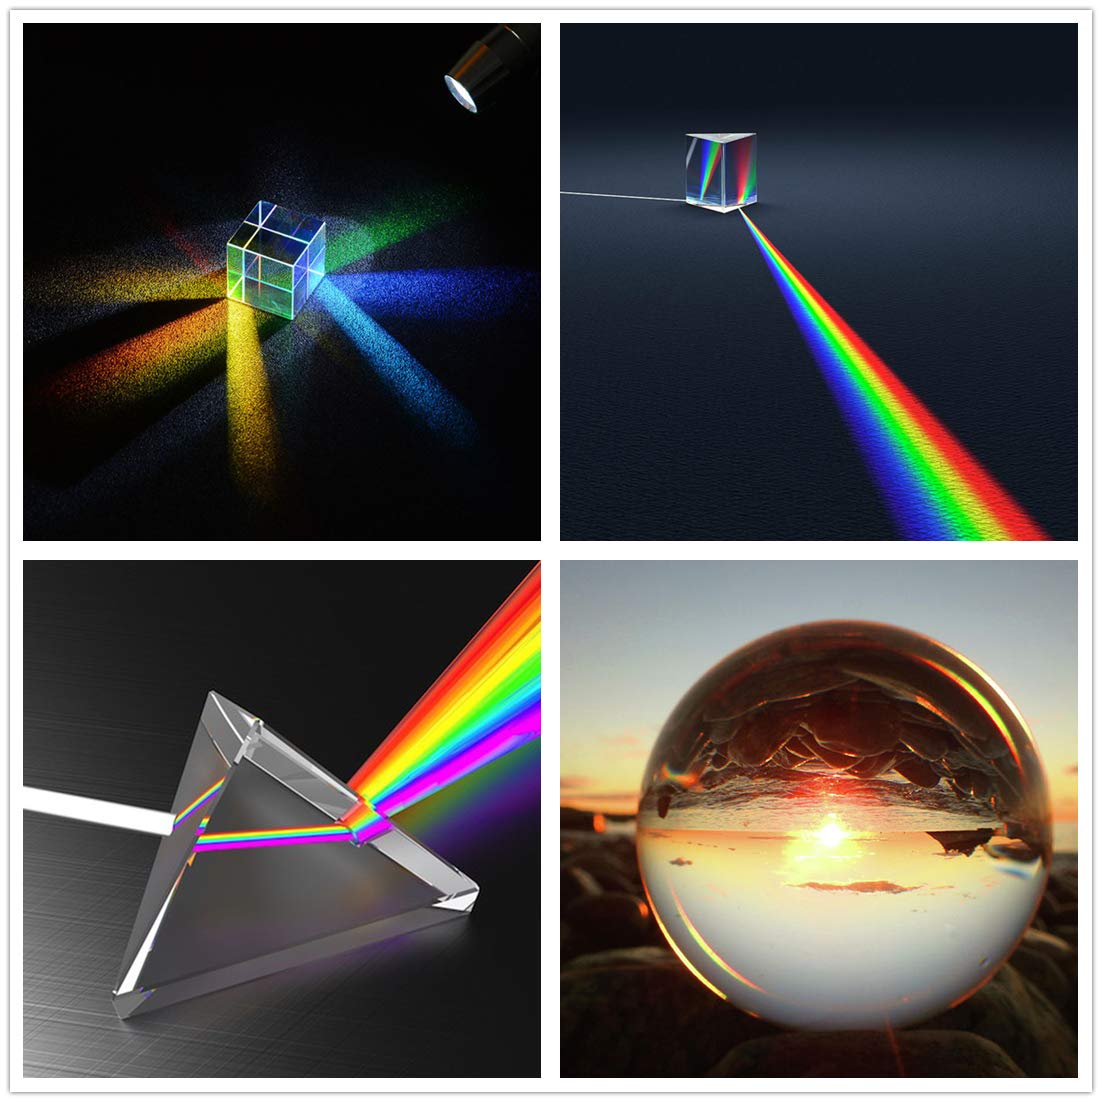 QFkris 7 Pack Crystal Photography Prism Set, Include 50mm Crystal Ball, 50mm Crystal Cube, 50mm Optical Pyramid, 25mm*1+50mm*2+100mm*1Triangular Prism